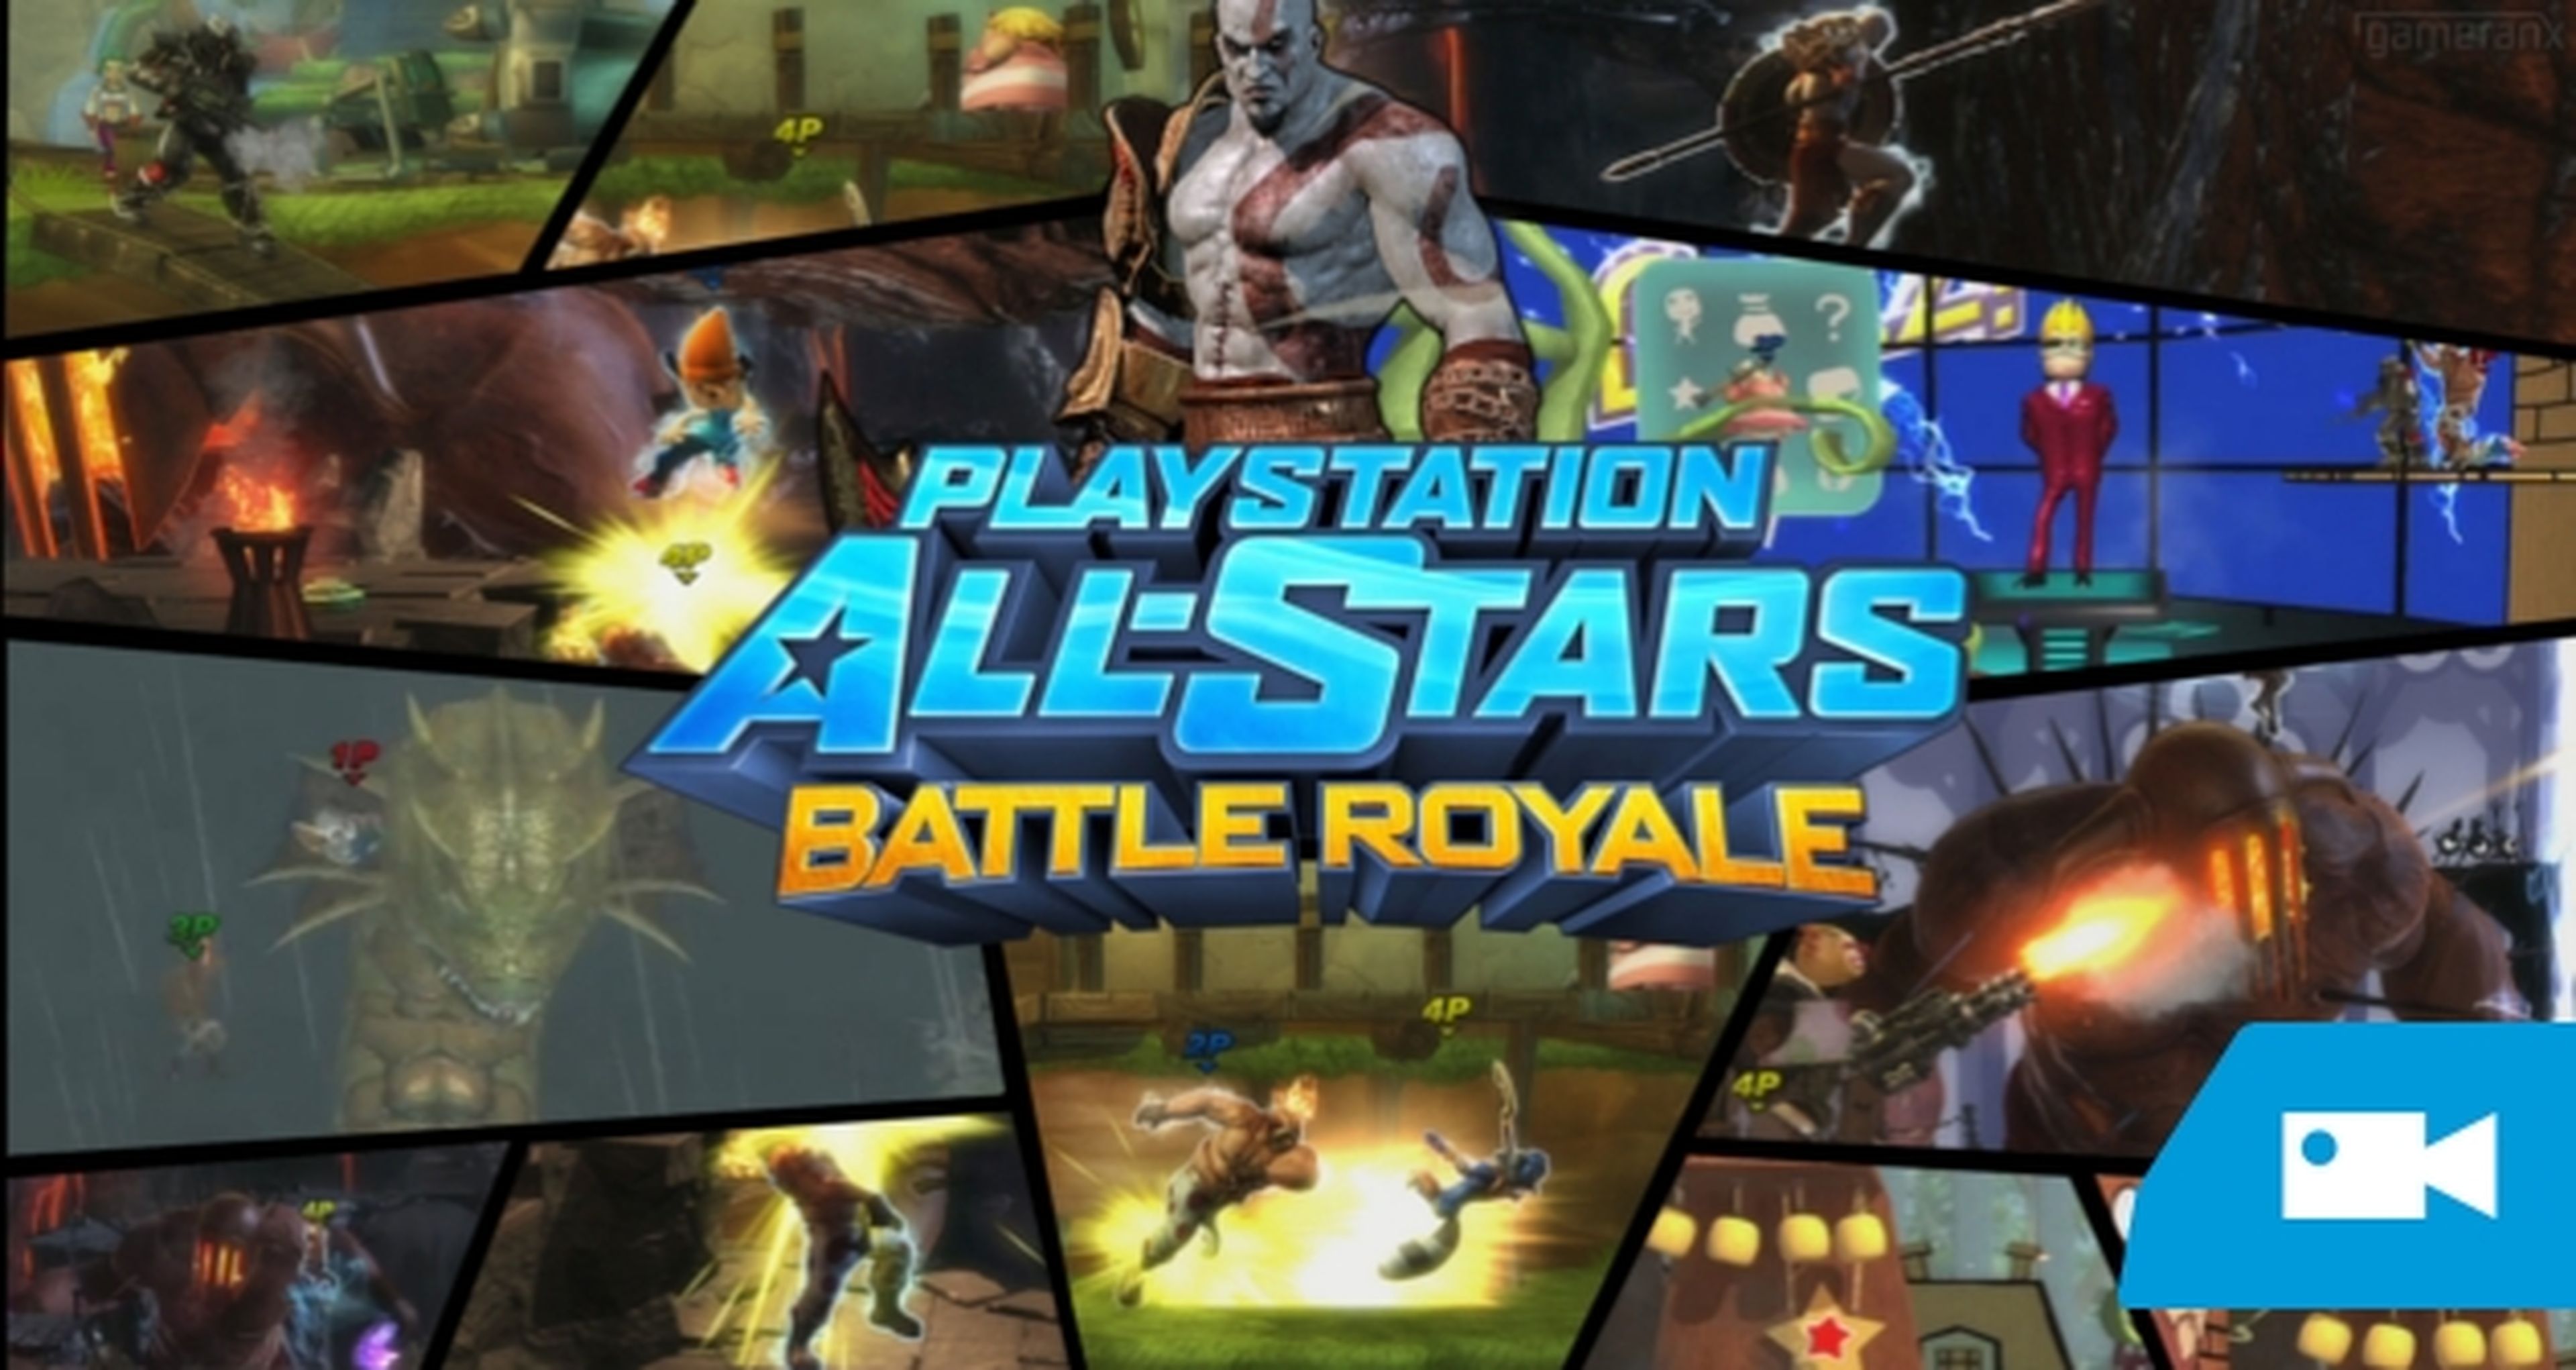 TGS 2012: PlayStation All-Stars Battle Royale